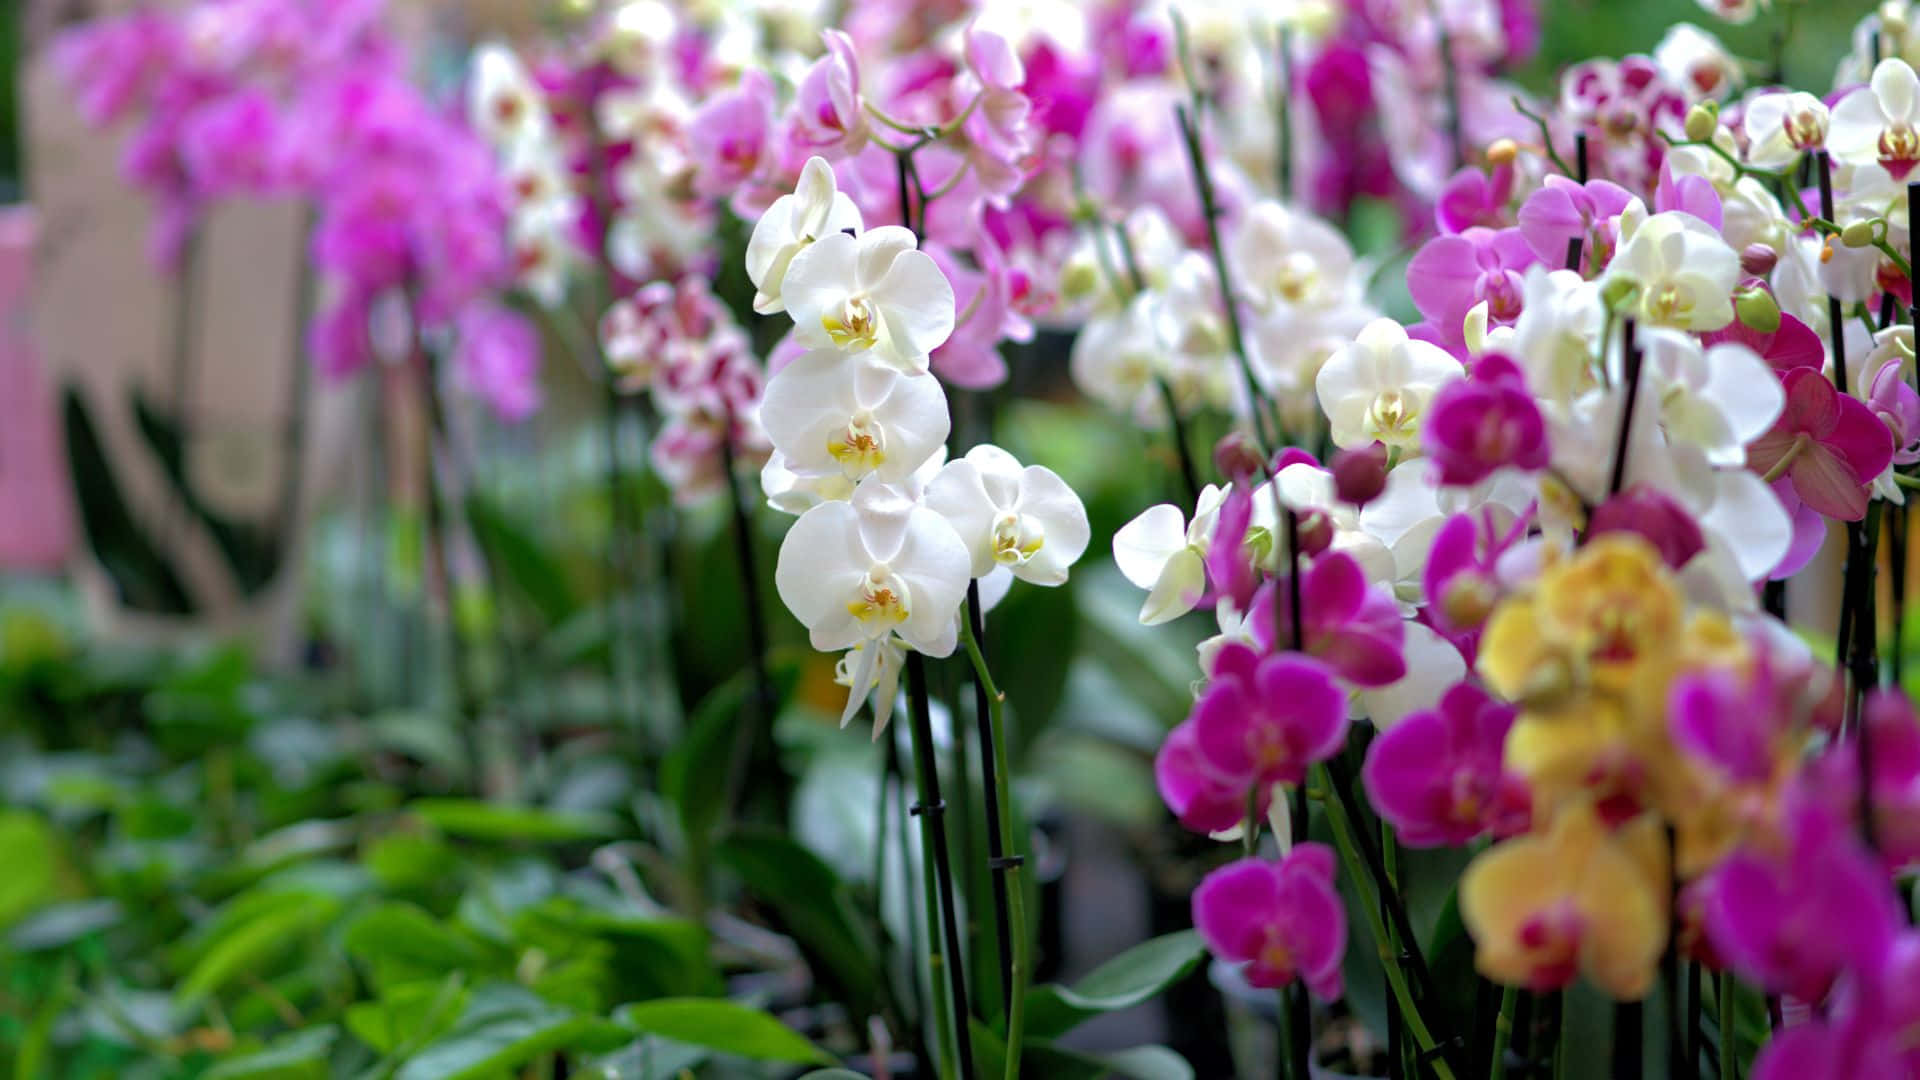 A vibrant, beautiful orchid flower with white, yellow, and purple petals